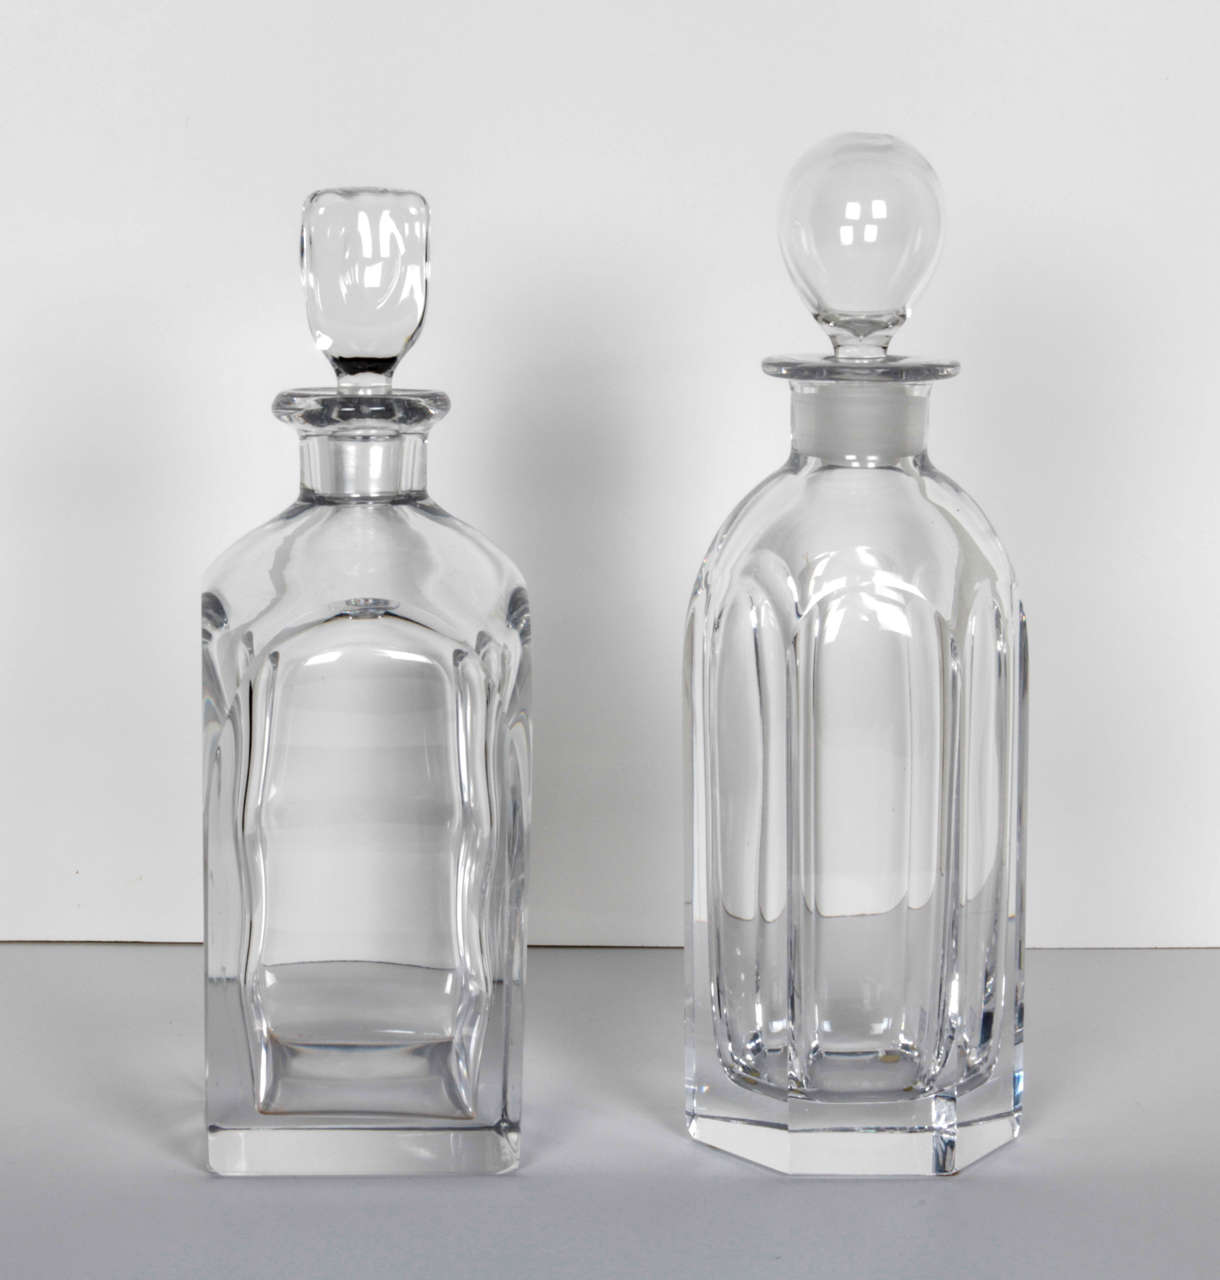 A pair of crystal Orrefors decanters. Signed. Can be purchased separately.

Left: 3.5